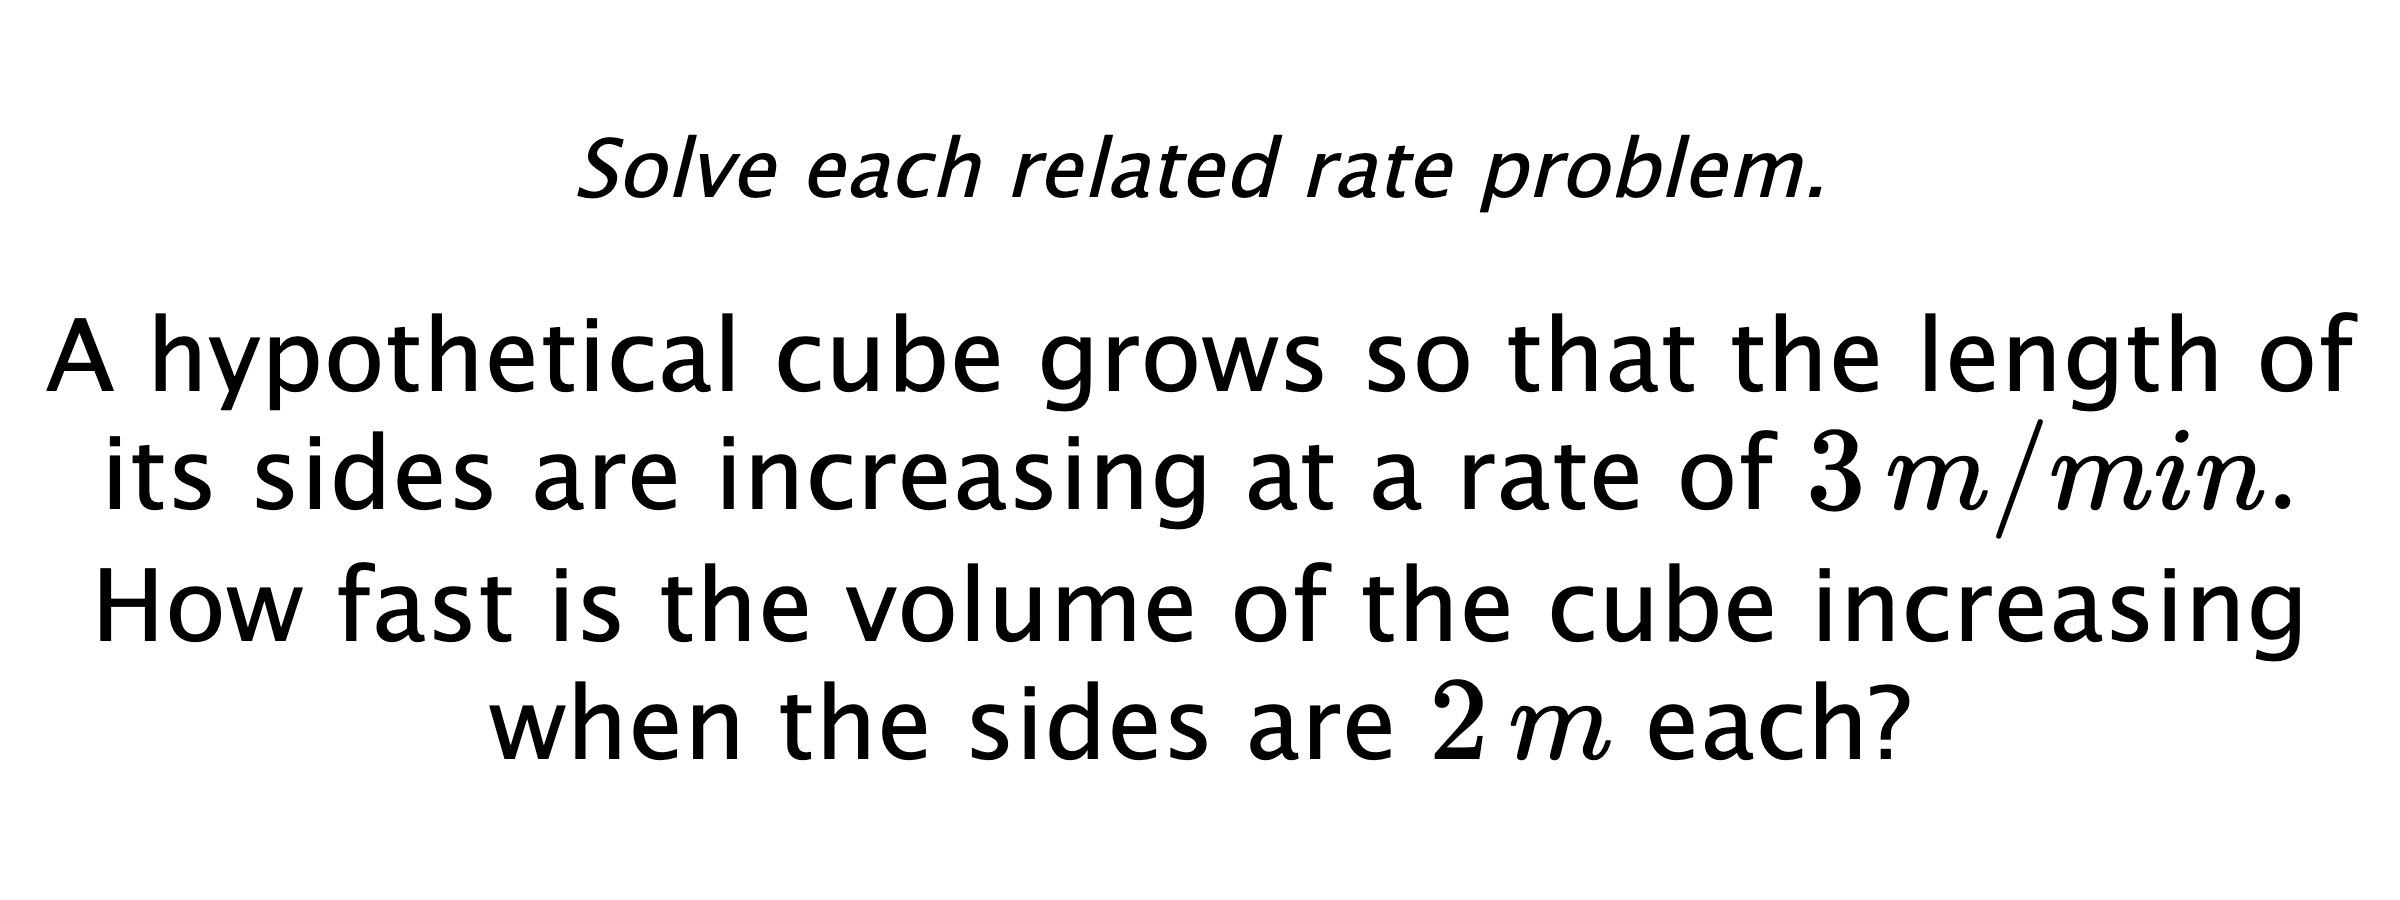 Solve each related rate problem. A hypothetical cube grows so that the length of its sides are increasing at a rate of $3\,m/min.$ How fast is the volume of the cube increasing when the sides are $2\,m$ each?